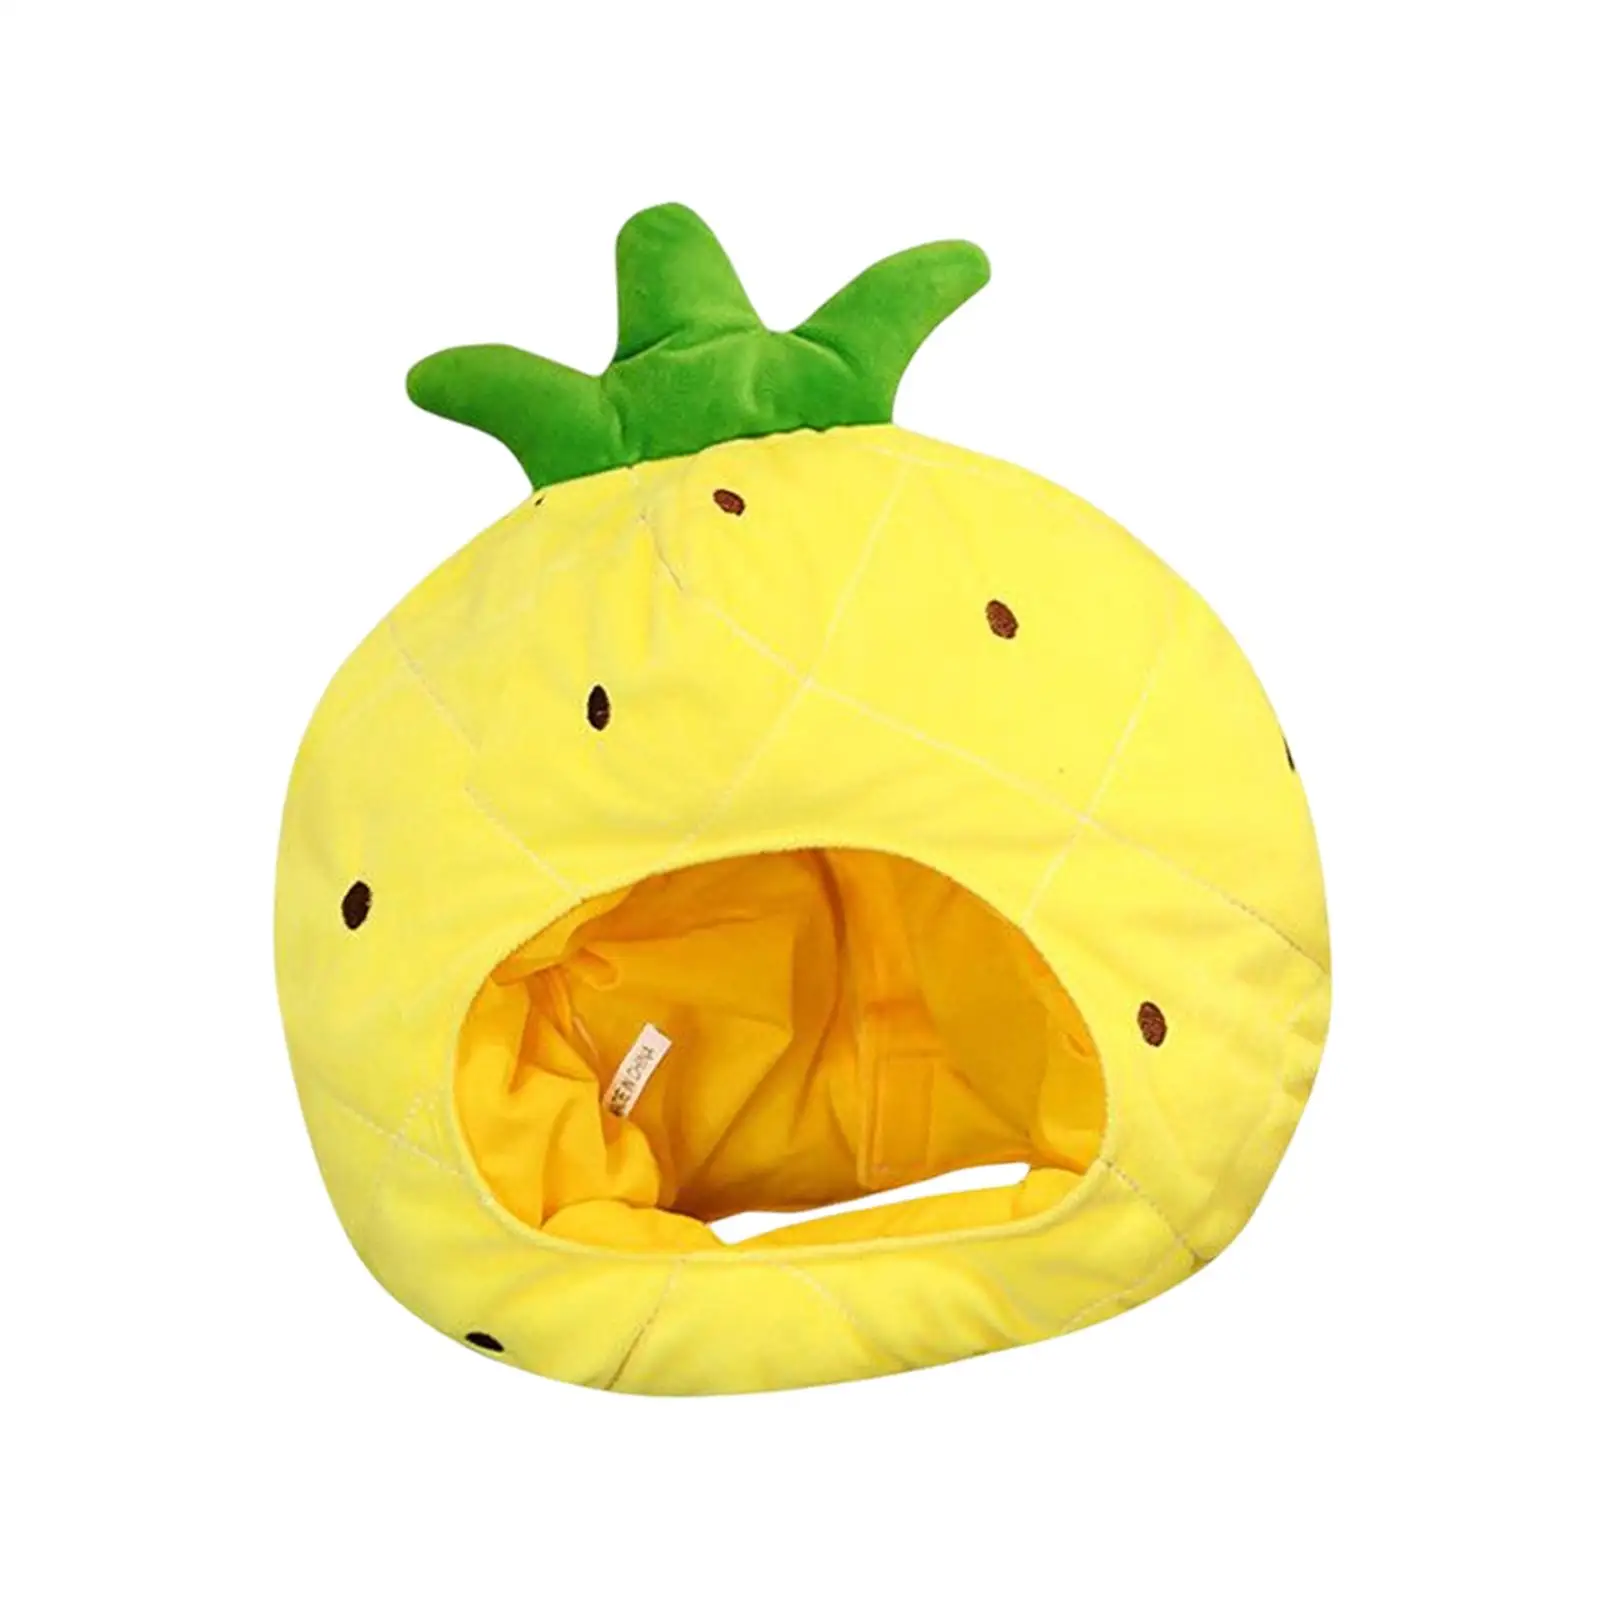 Pineapple Hats Headwear Plush Decorations Comfortable Warm Accessory Novelty Fruit Hat Costume Hat for Party Girl